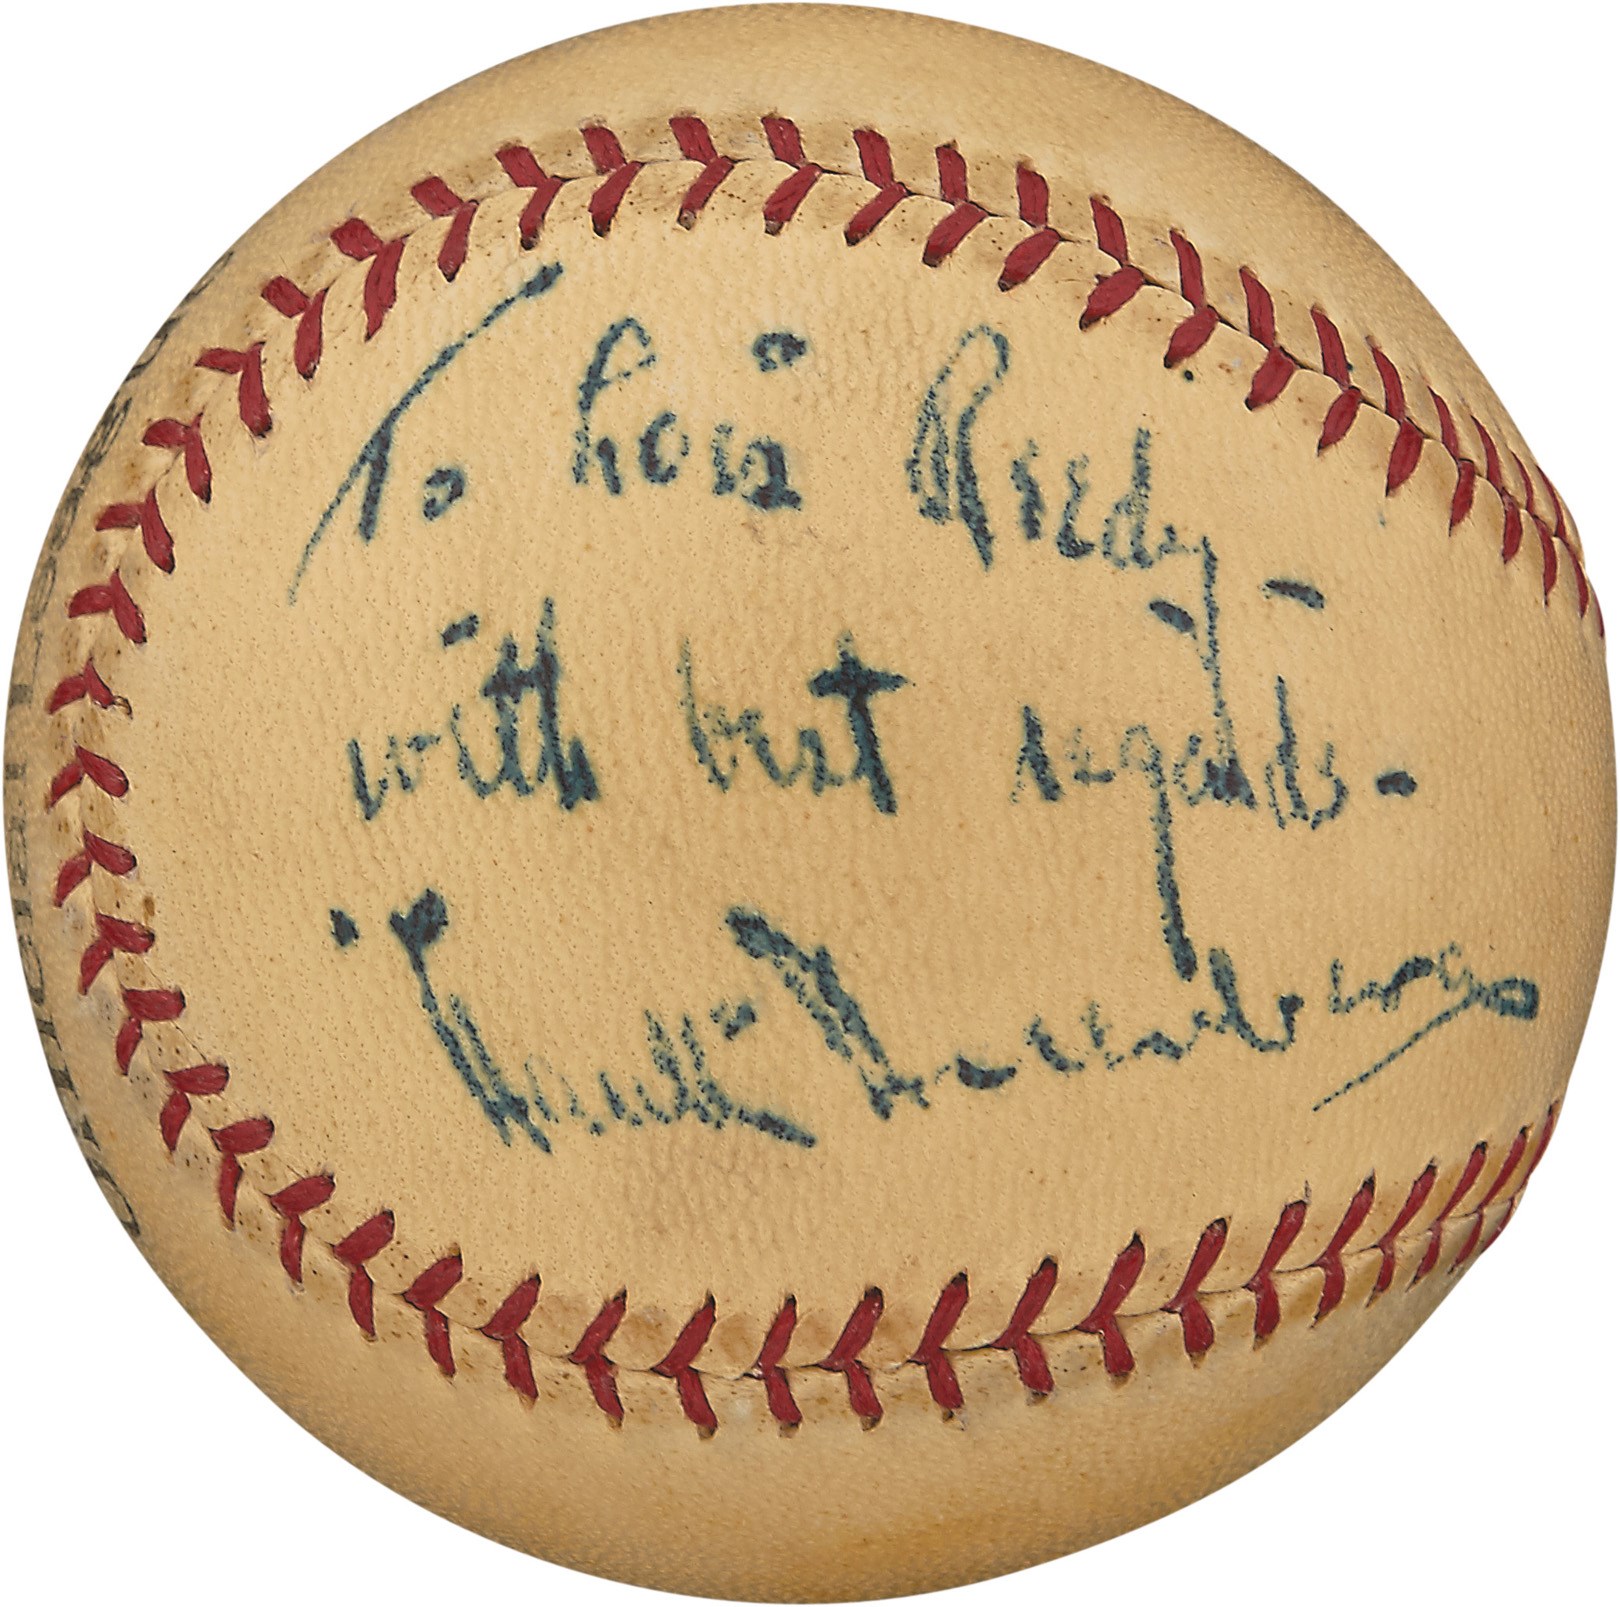 Ty Cobb and Detroit Tigers - Early 1940s Hank Greenberg Single-Signed Reach Baseball (PSA)